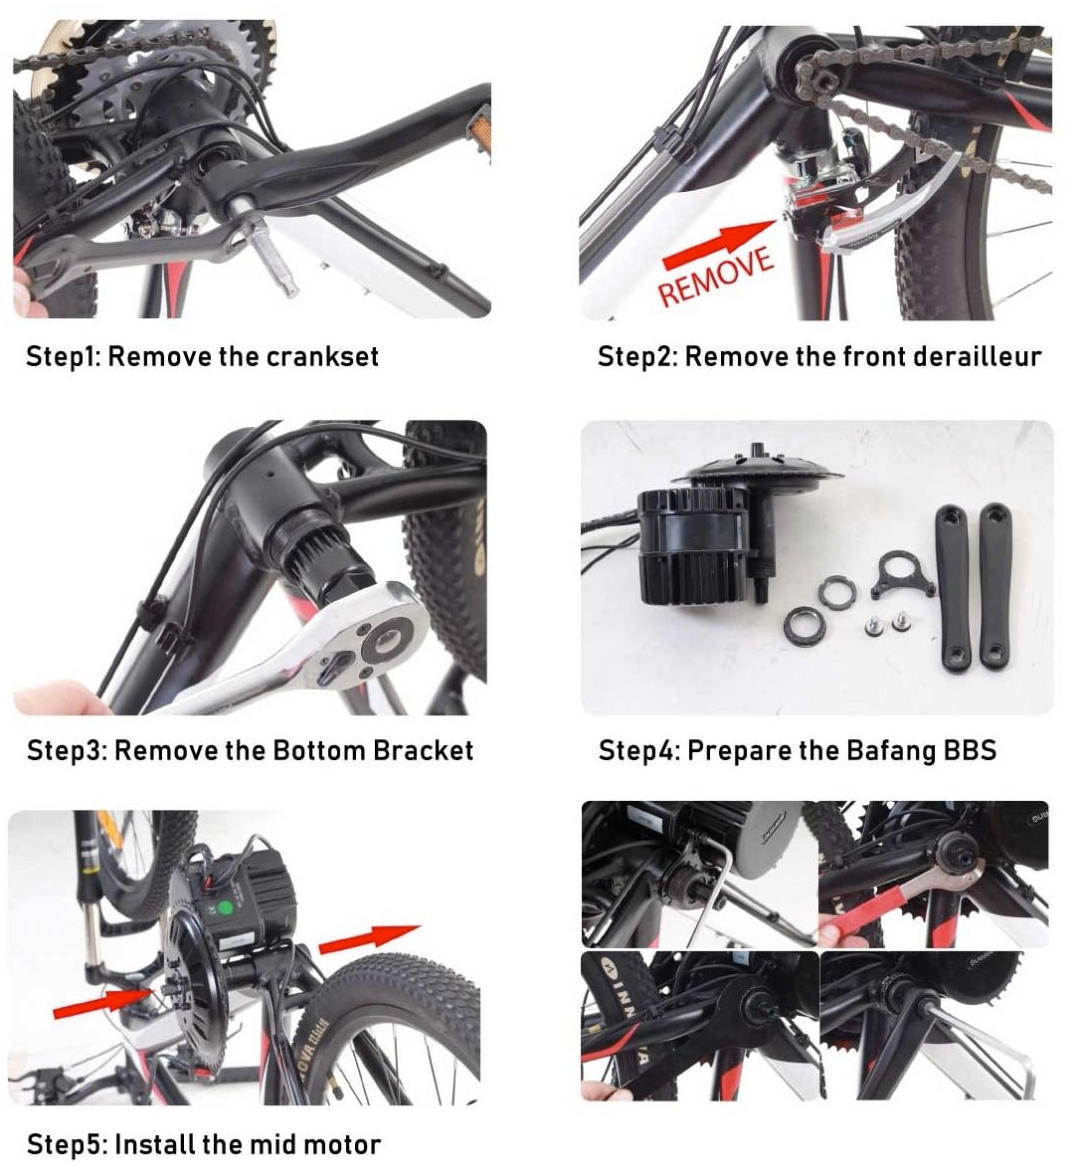 An image showing the Bafang Mid Drive Kit Australia being installed step-by-step.